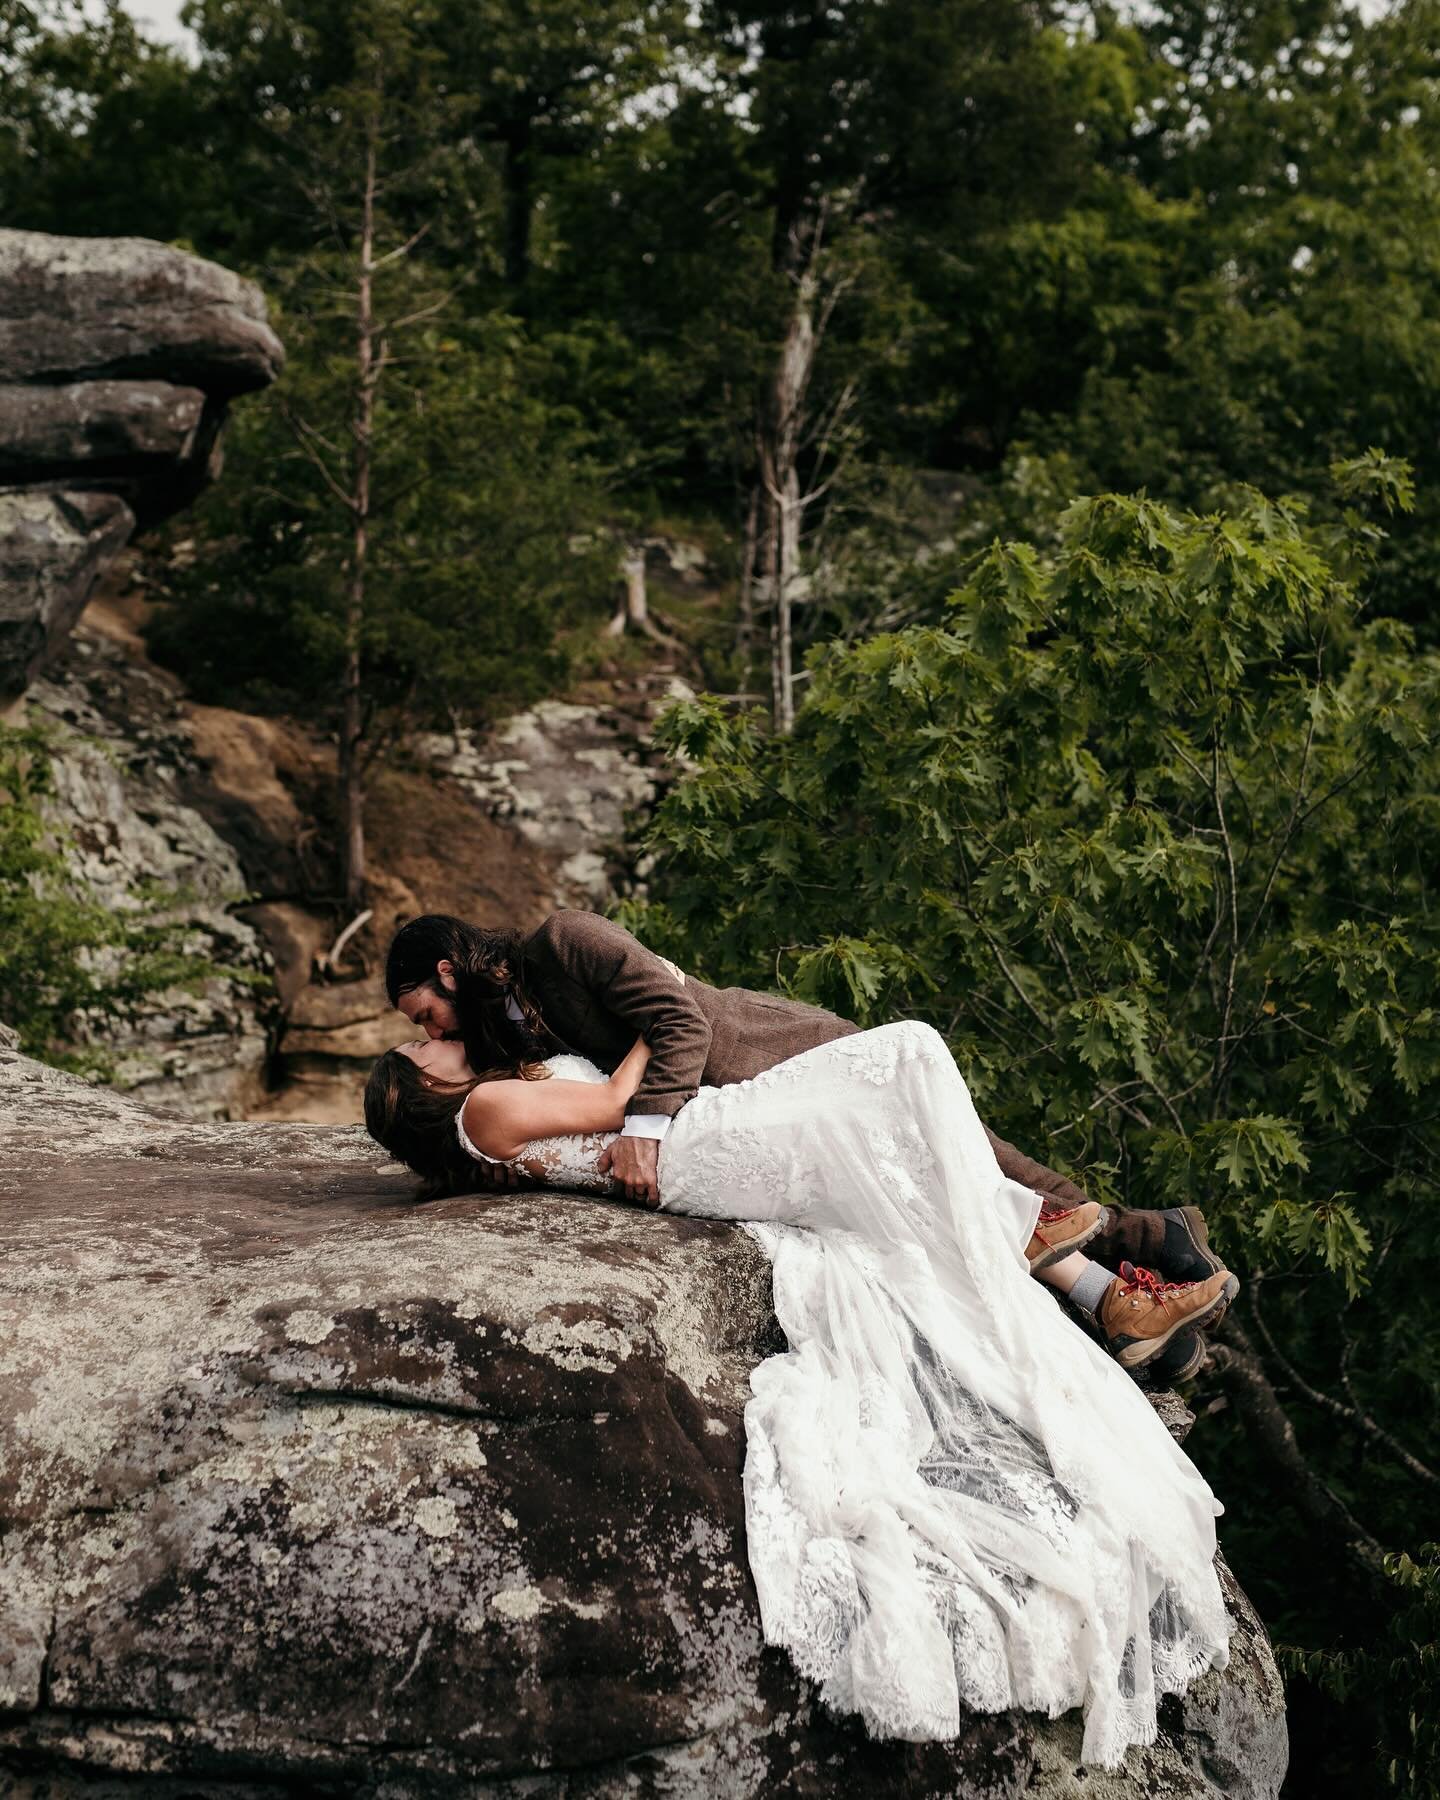 Had a wedding on Sunday that I absolutely loved&hellip; will be sharing more very soon but just so thankful to my couples who choose to follow their gut &amp; opt for an elopement or smaller wedding that feels right for them. We hiked all over the @t